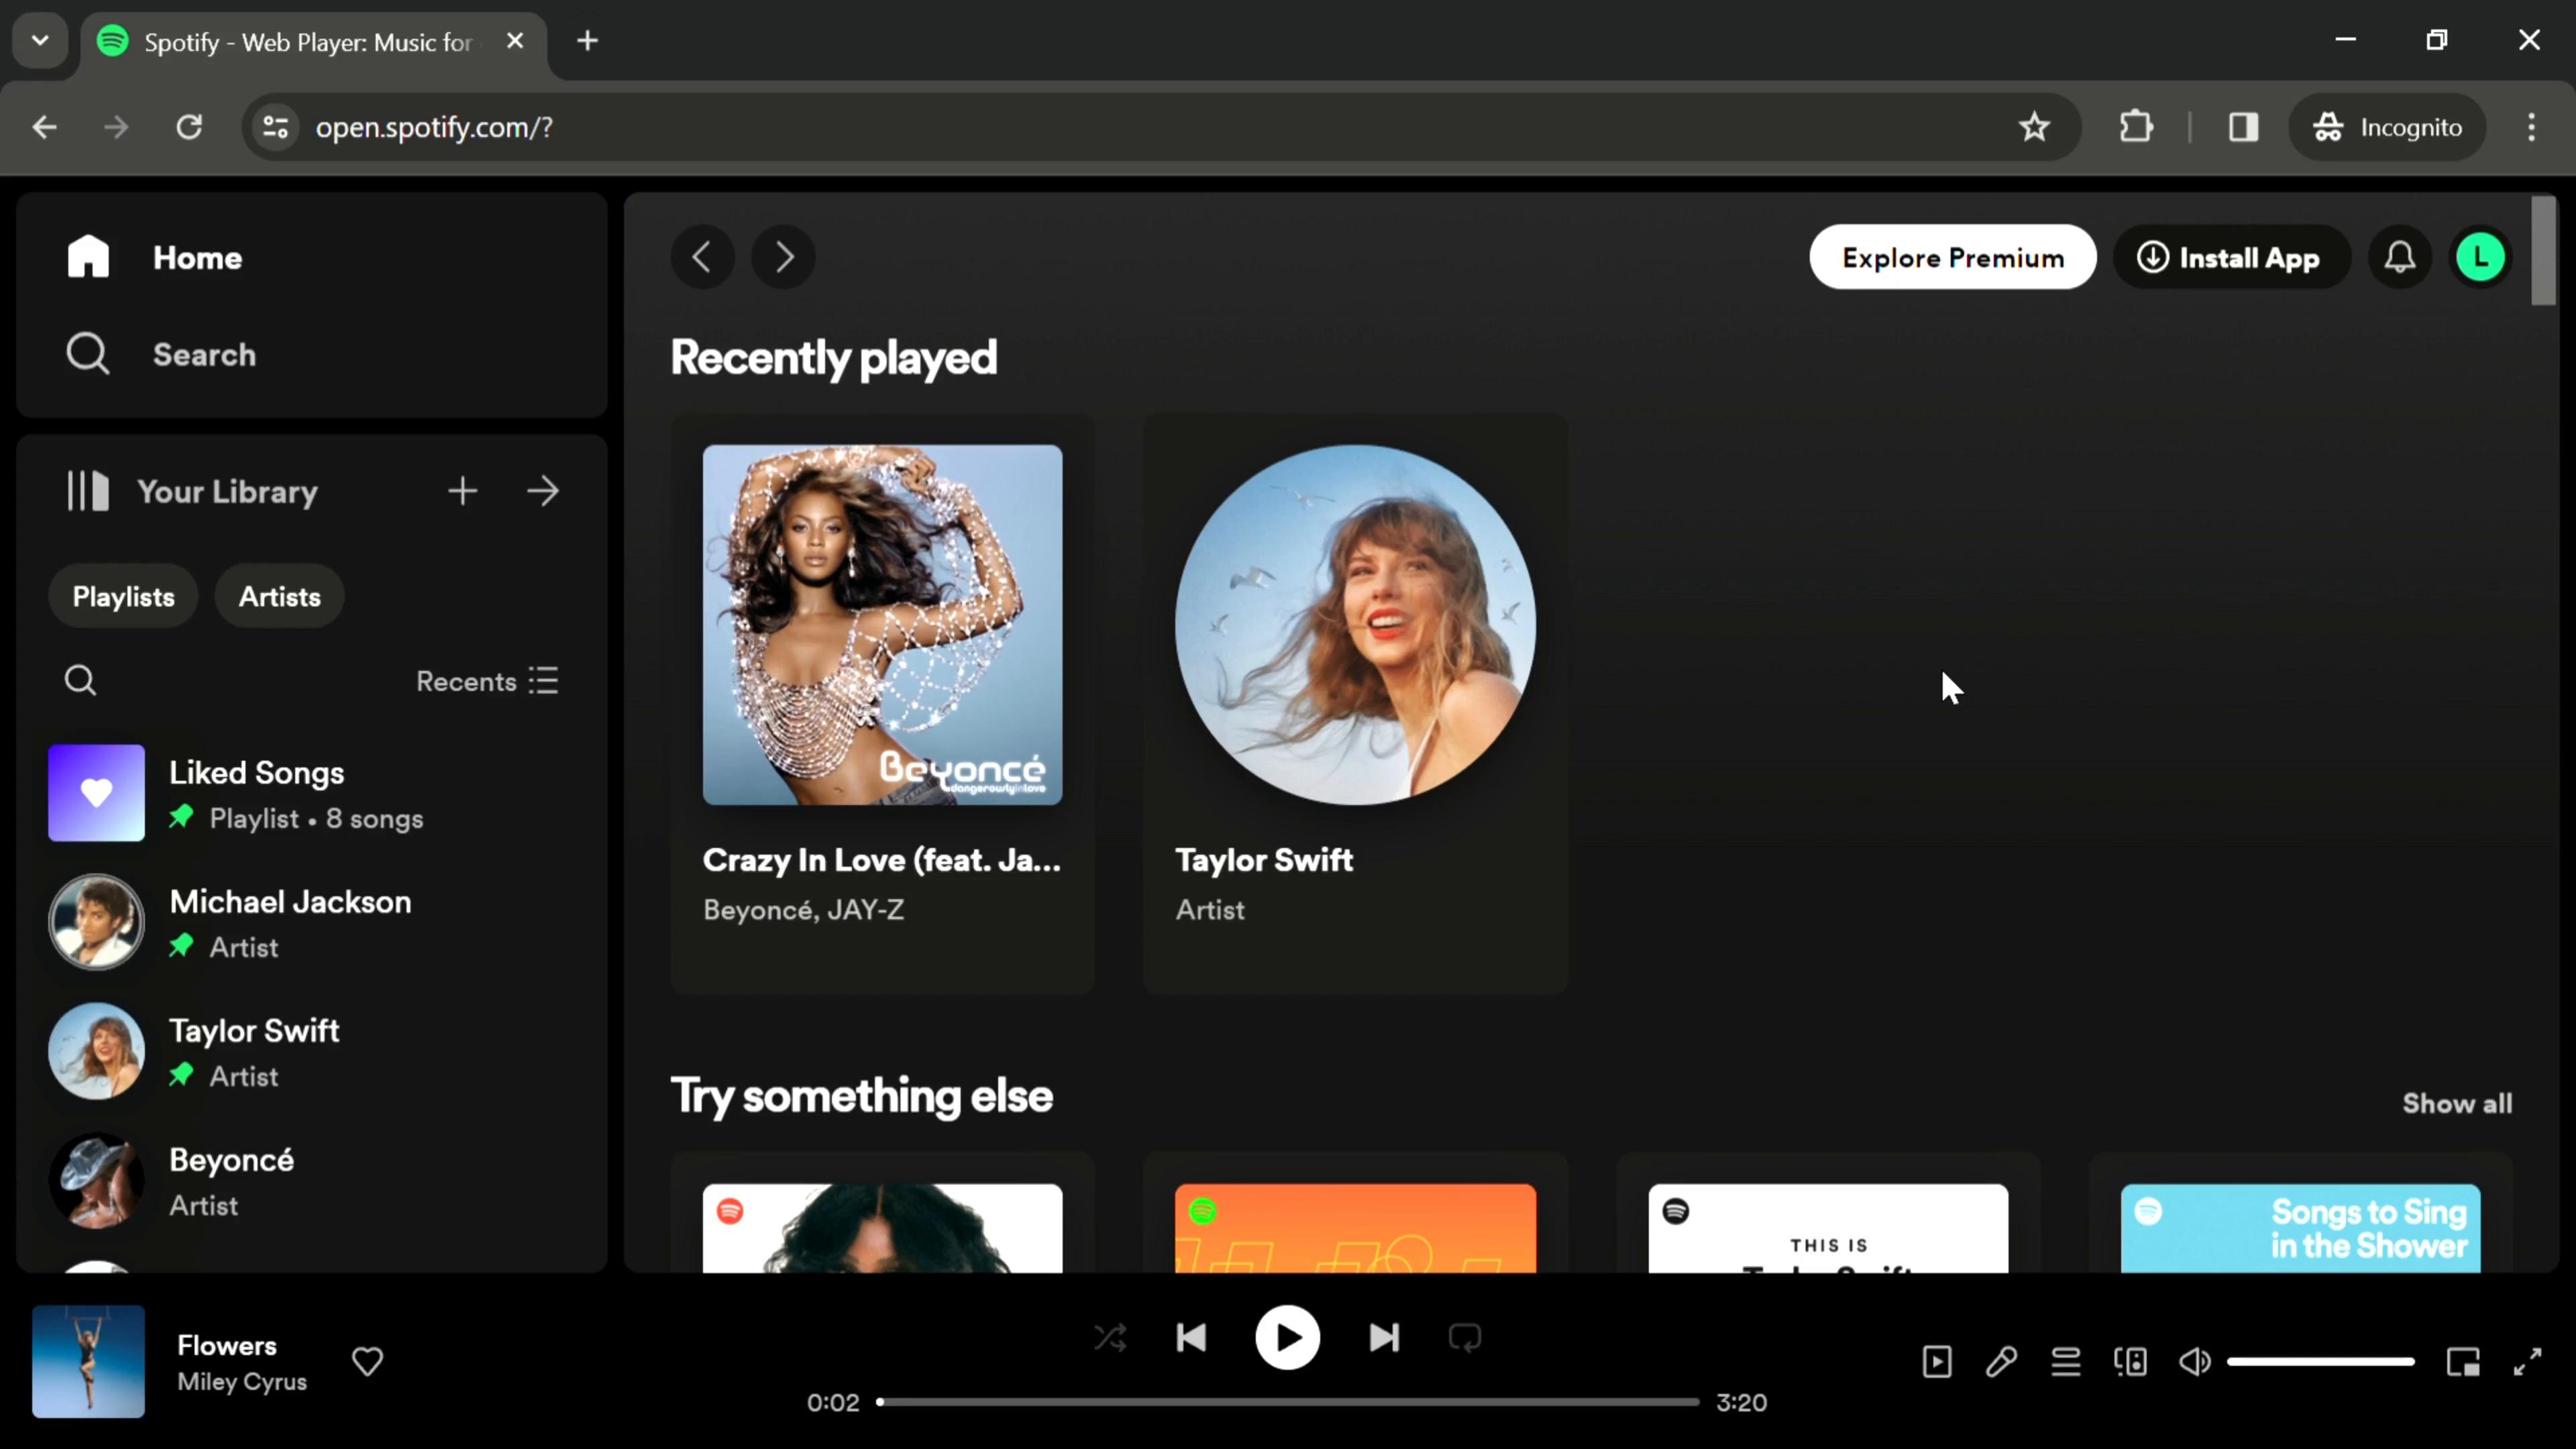 Updating your profile on Spotify video screenshot